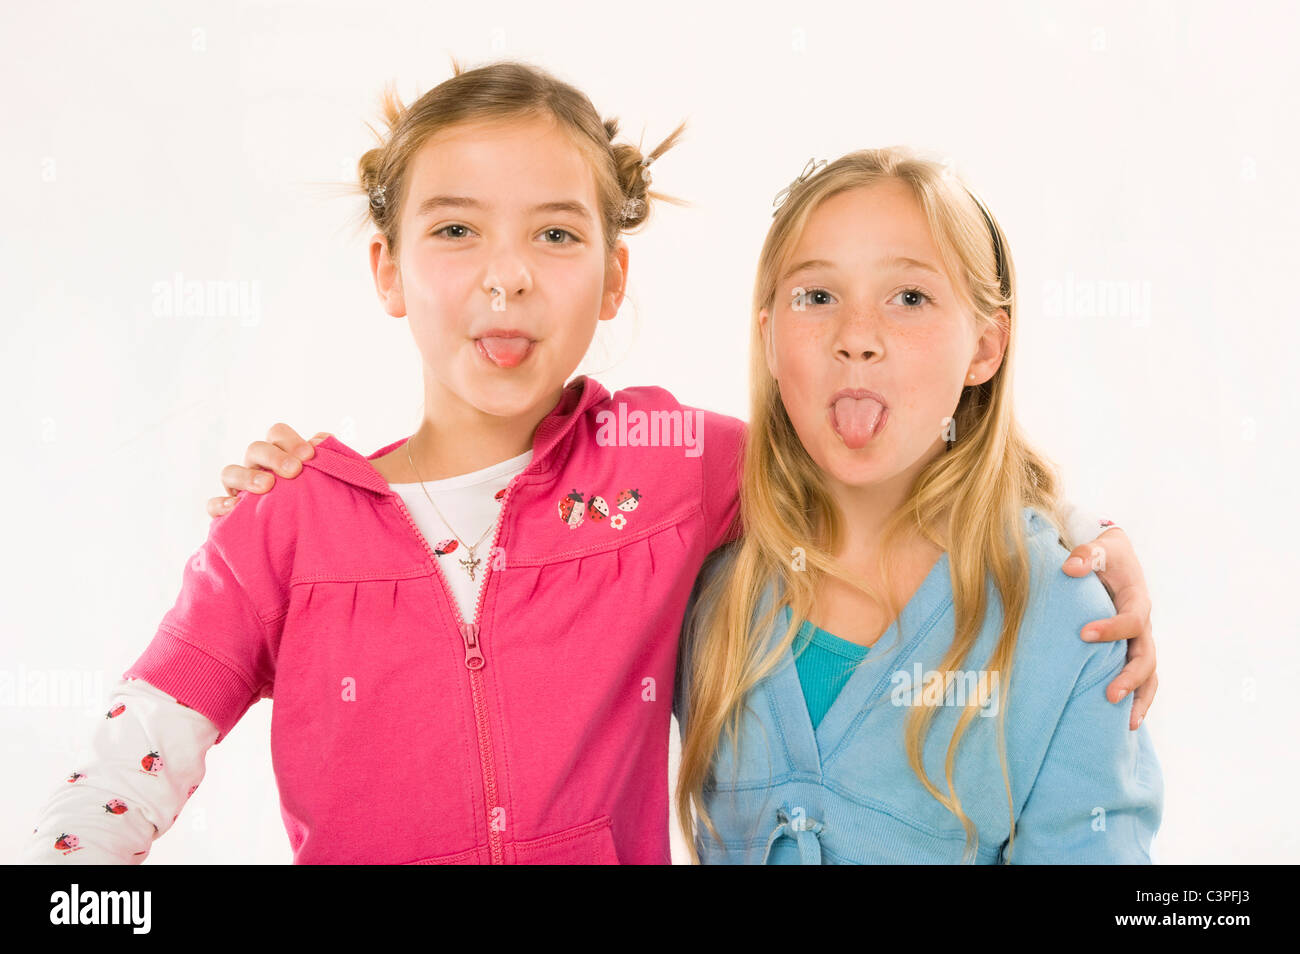 Two Girls 8 9 Embracing Sticking Out Tongues Smiling Portrait